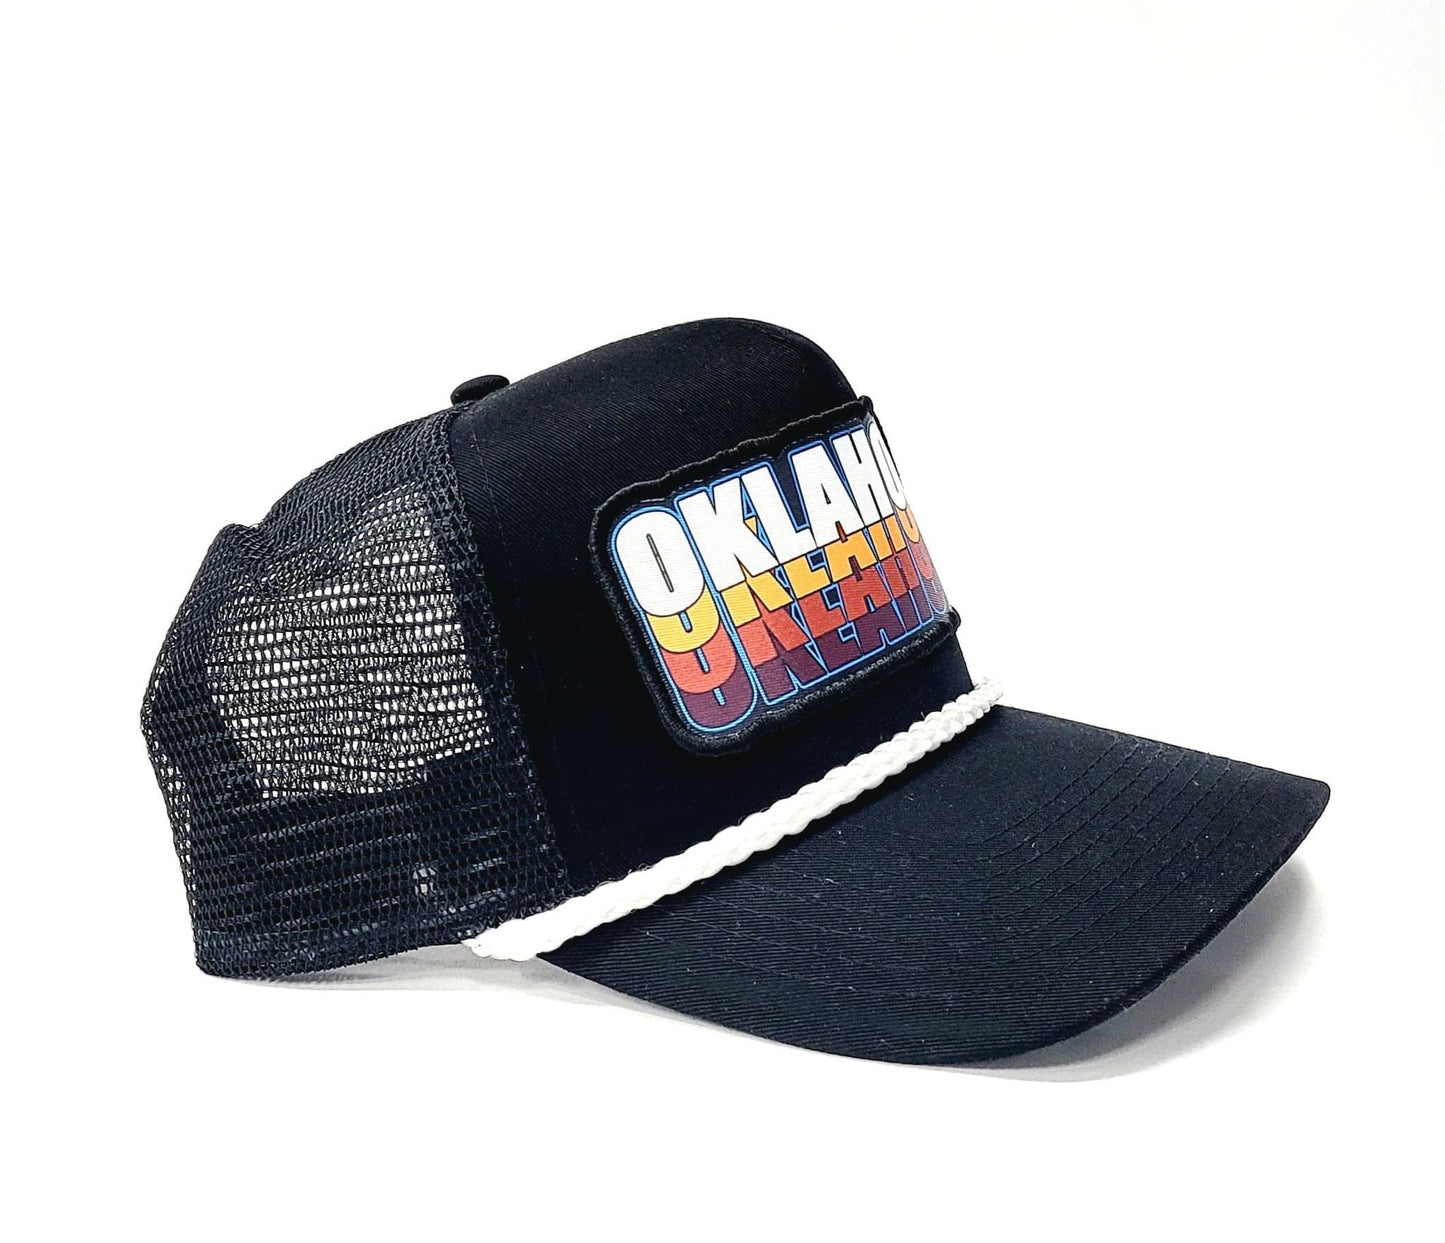 Retro Vintage Oklahoma Patch Rope Snapback Hat - One Size Fits All Trucker Cap - Great Okie Gift for Men and Women